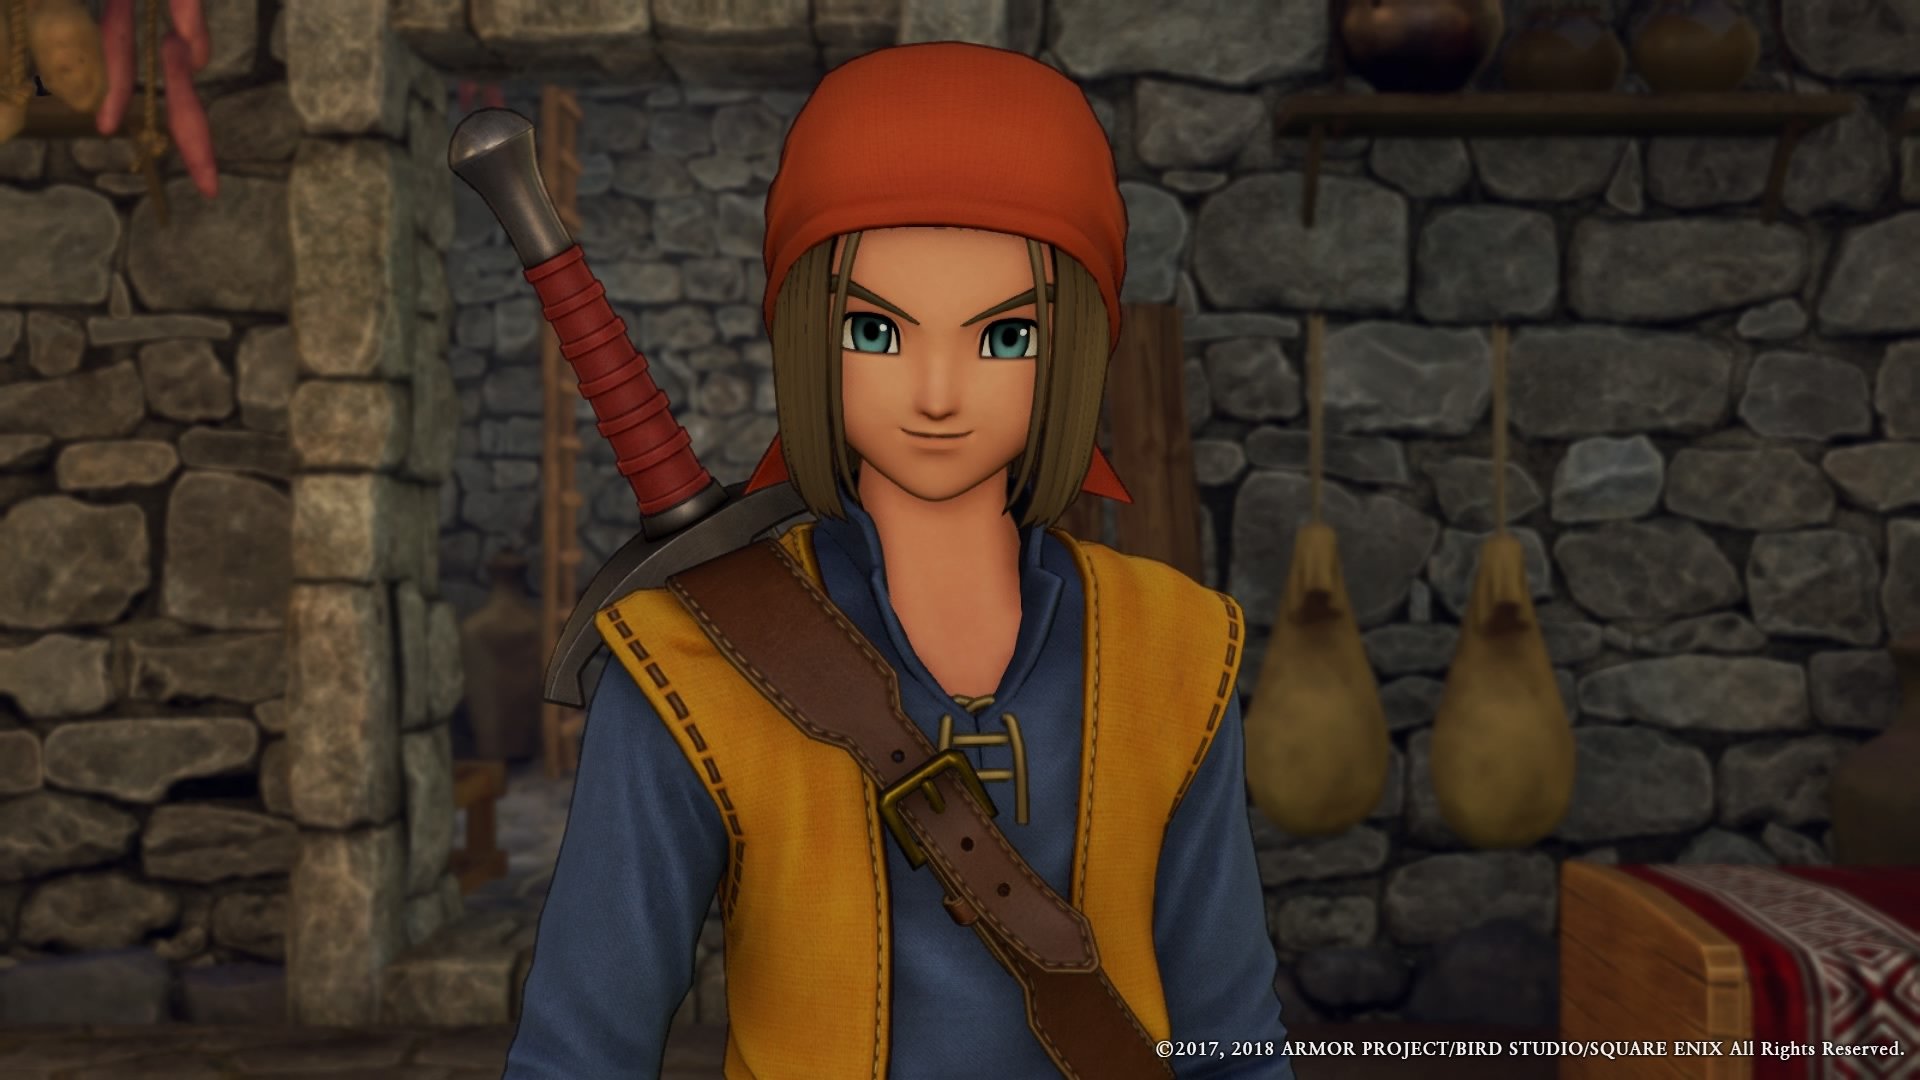 Wear The Dragon Quest VIII Hero's Threads In Dragon Quest XI - Game Informer